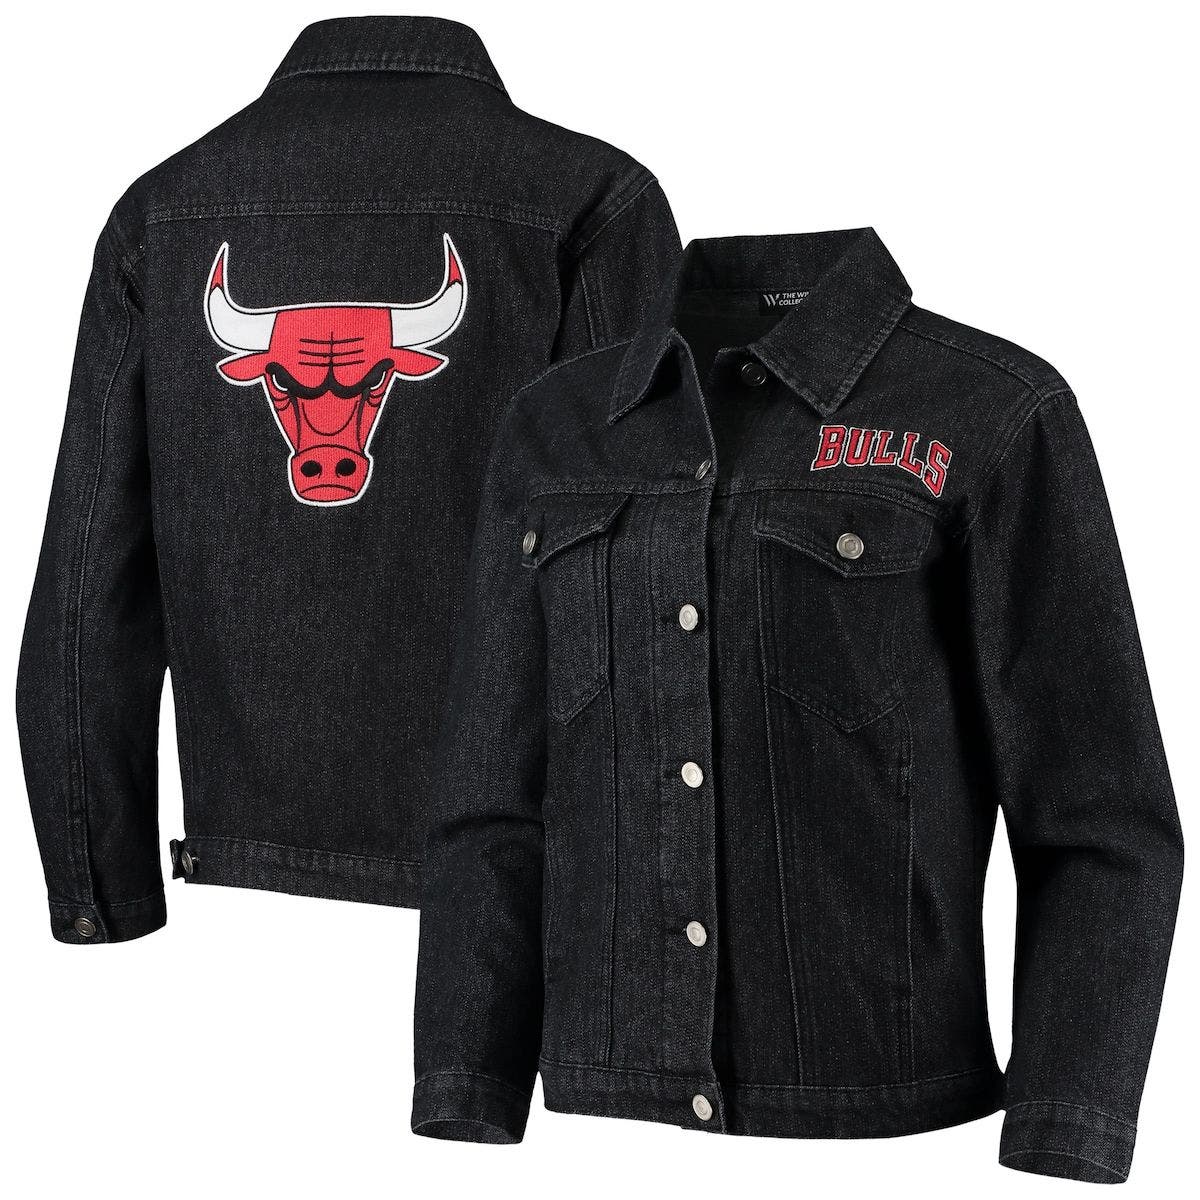 THE WILD COLLECTIVE Women's The Wild Collective Black Chicago Bulls Patch Denim Button-Up Jacket at Nordstrom